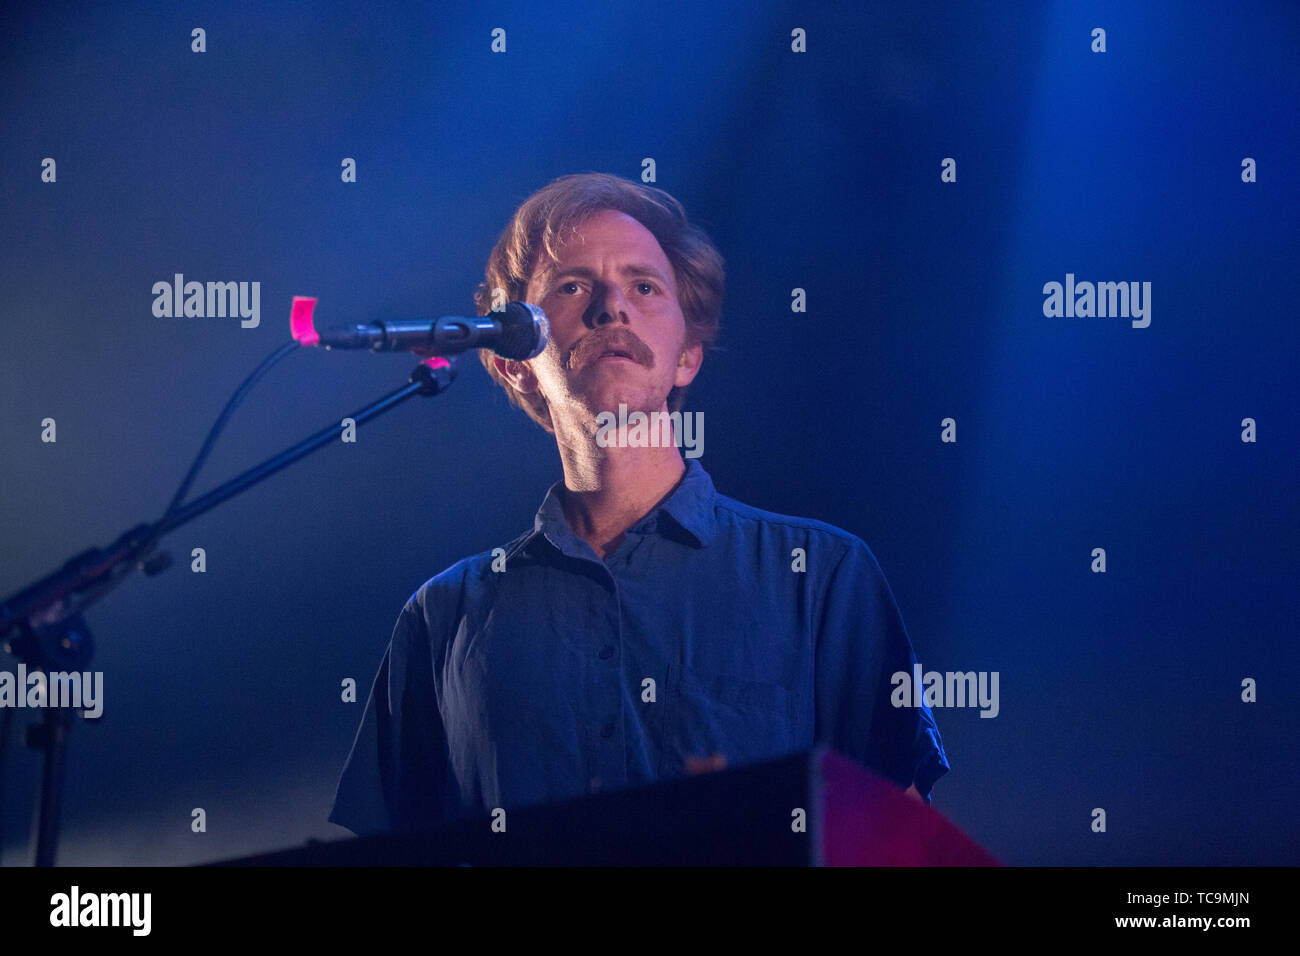 Norway, Oslo - June 4, 2019. Deerhunter, the American indie rock band, performs a live concert at Rockefeller in Oslo. (Photo credit: Gonzales Photo - Per-Otto Oppi). Stock Photo